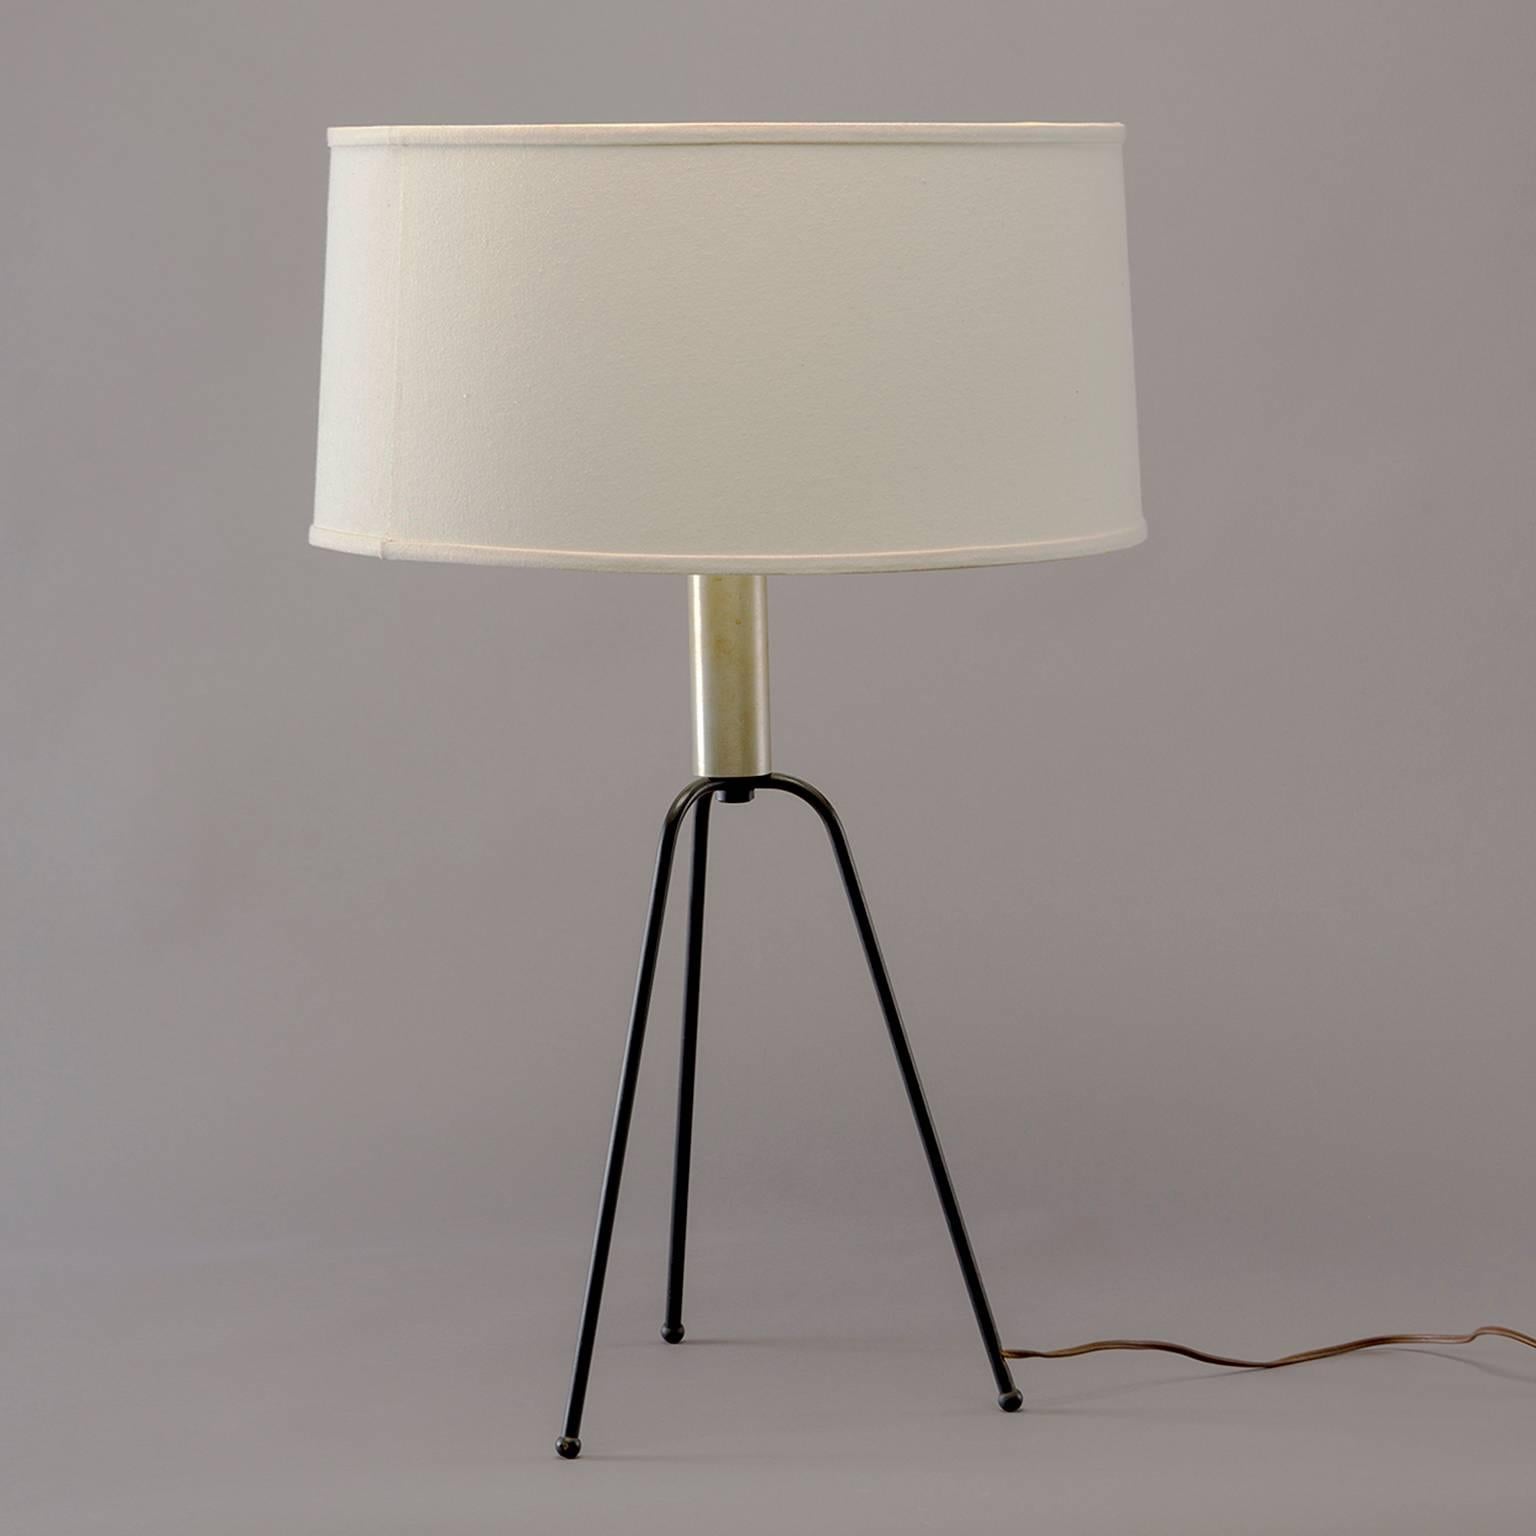 Table lamp has Minimalist black iron tripod base, brass socket piece and off-white drum shade with notched spokes designed to fit securely on glass globe beneath, circa 1950s. Measurements shown include shade. Wiring as found - test and works.